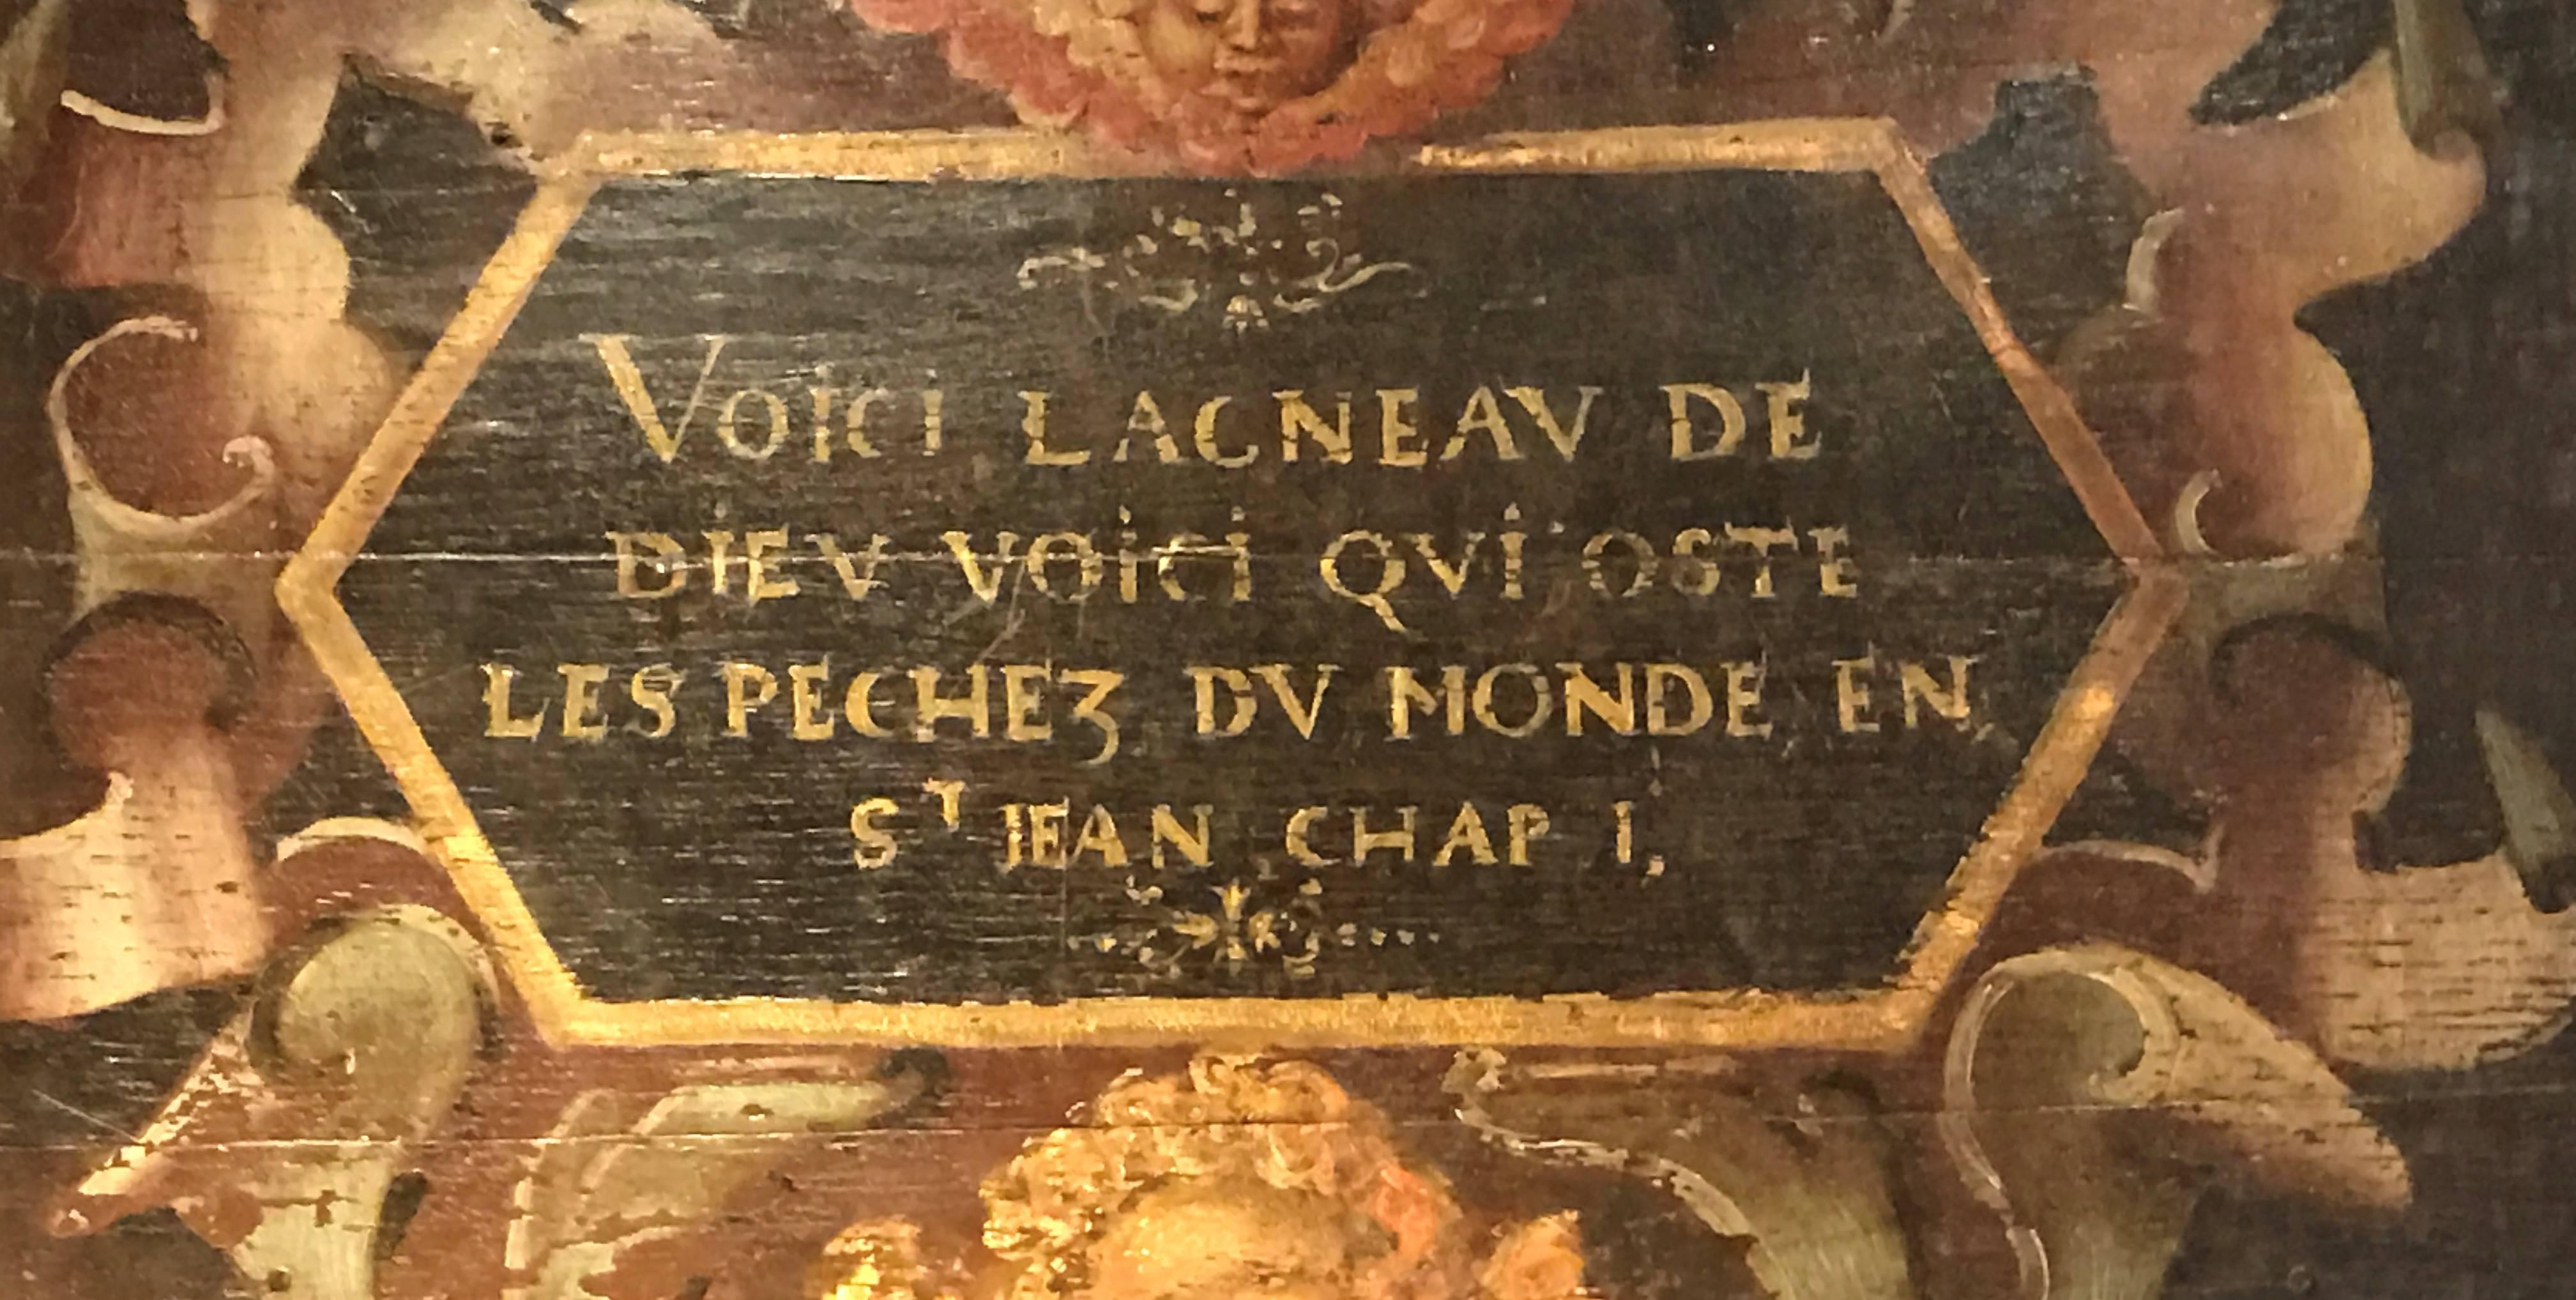 18th century oil painting on a wooden panel evangelical text.